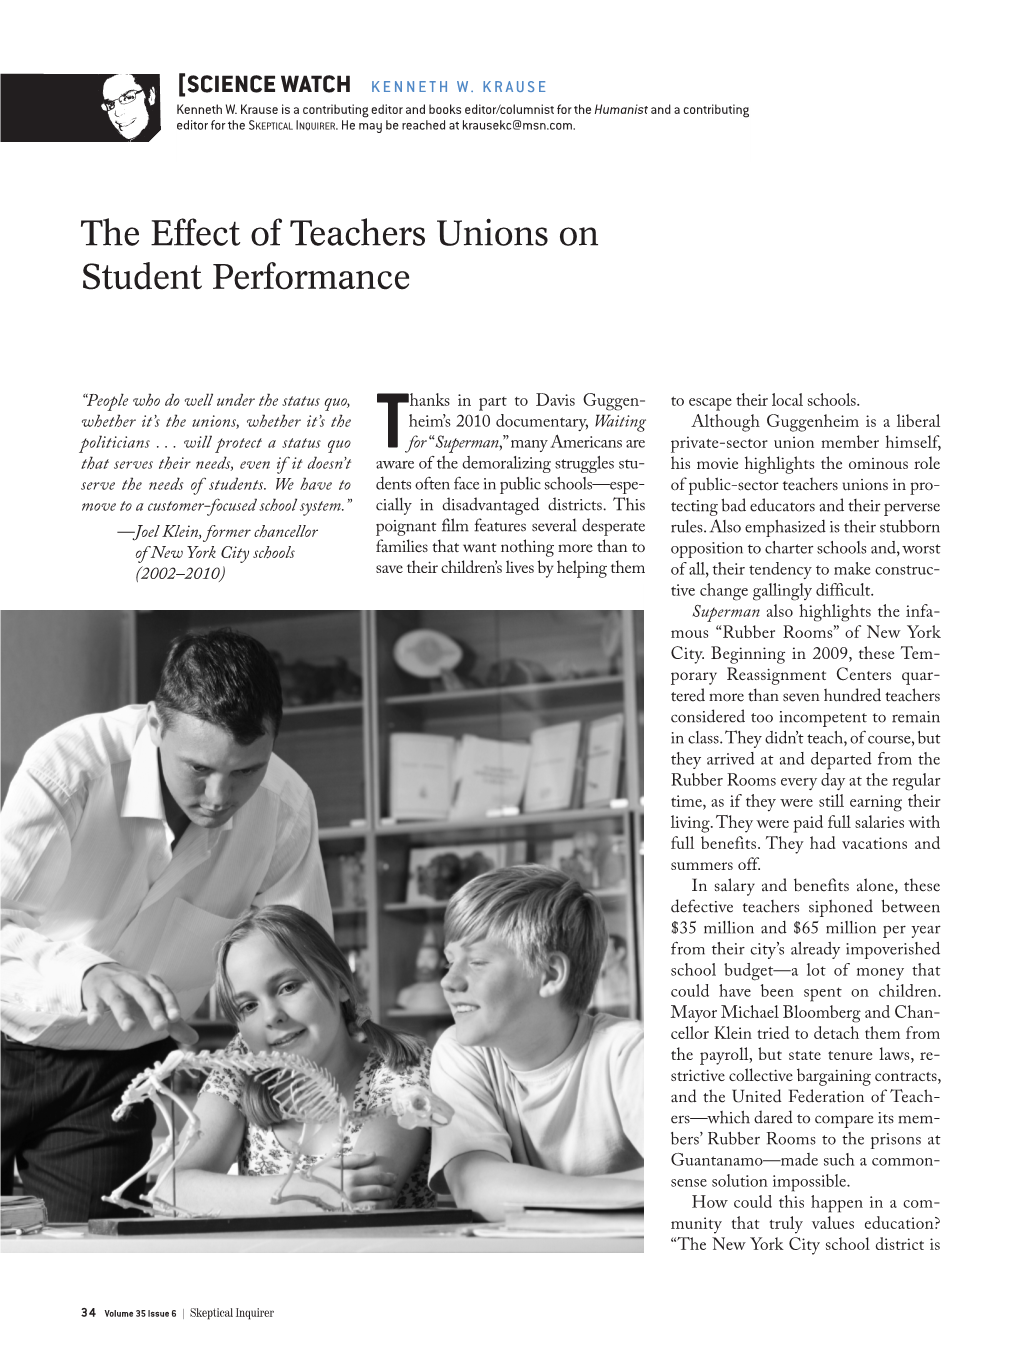 The Effect of Teachers Unions on Student Performance